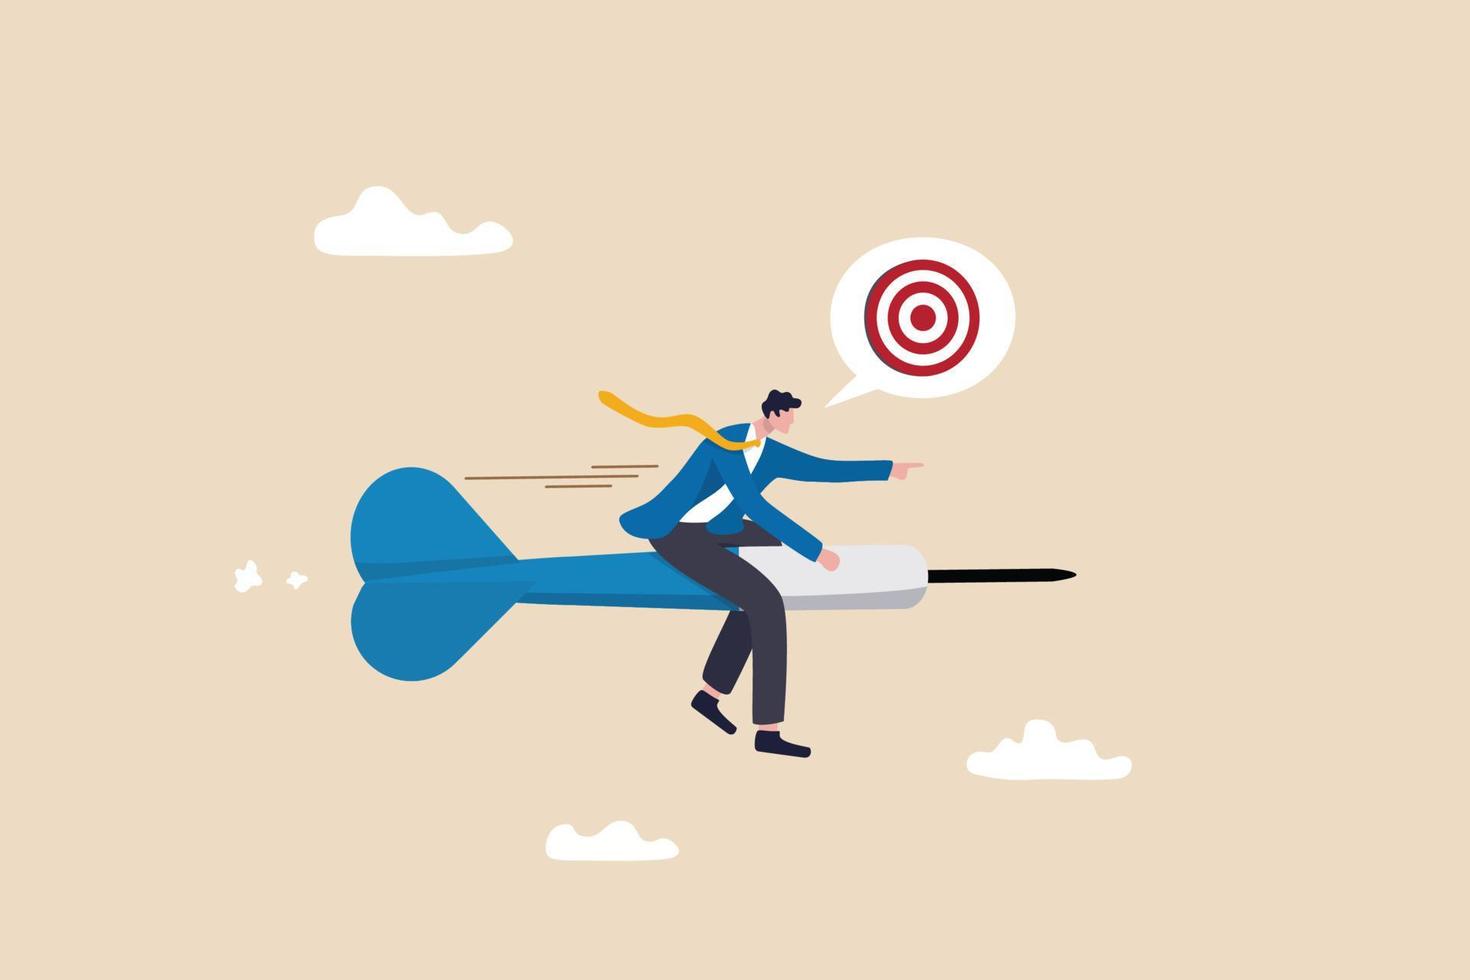 Aiming for target or goal, determination and strategy to reach target and achieve business success, aspiration and direction to win and victory, confidence businessman riding dart aiming for target. vector